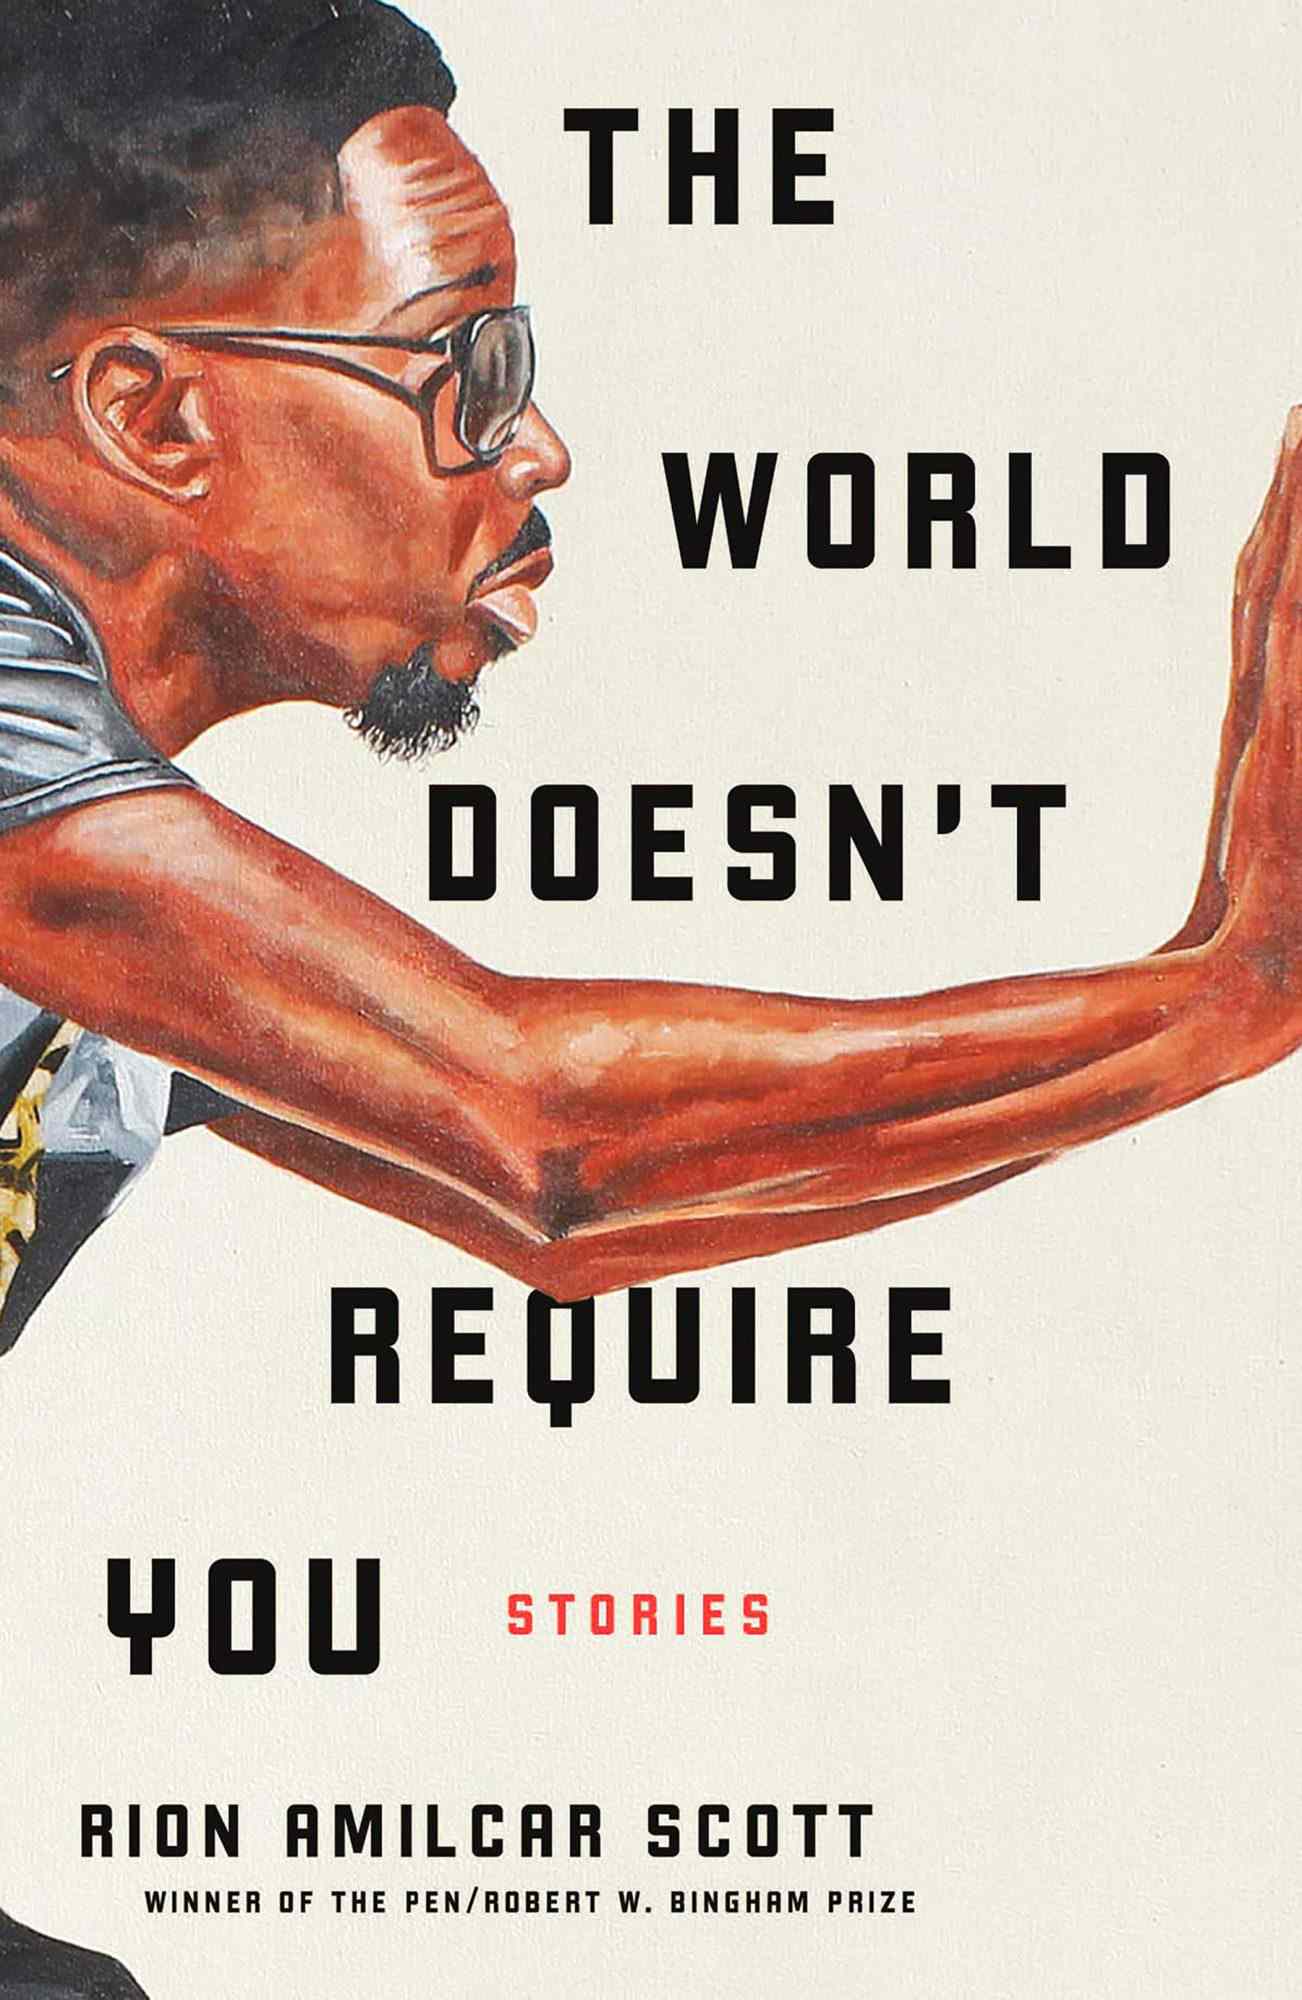 The World Doesn't Require You, by Rion Amilcar Scott